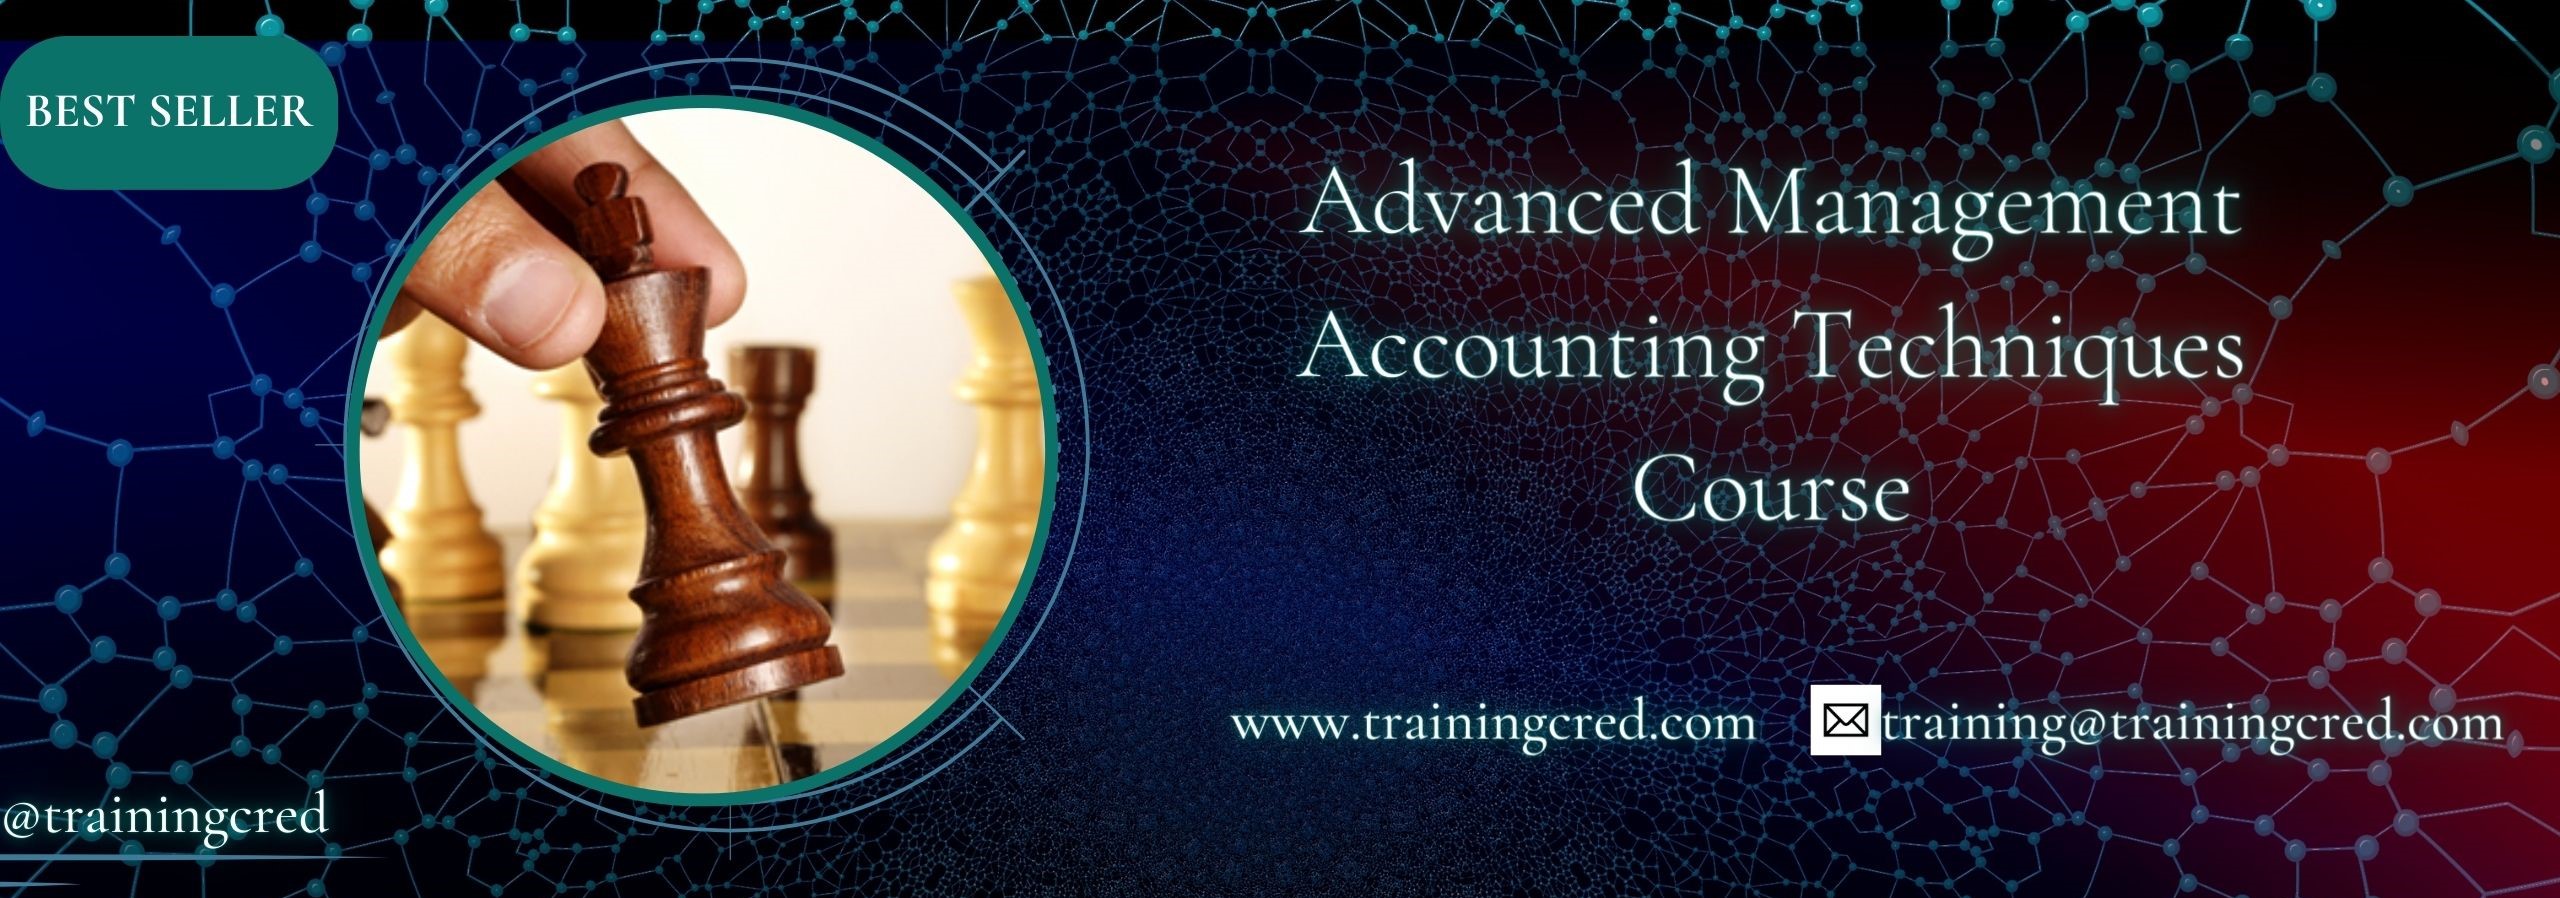 Advanced Management Accounting Techniques